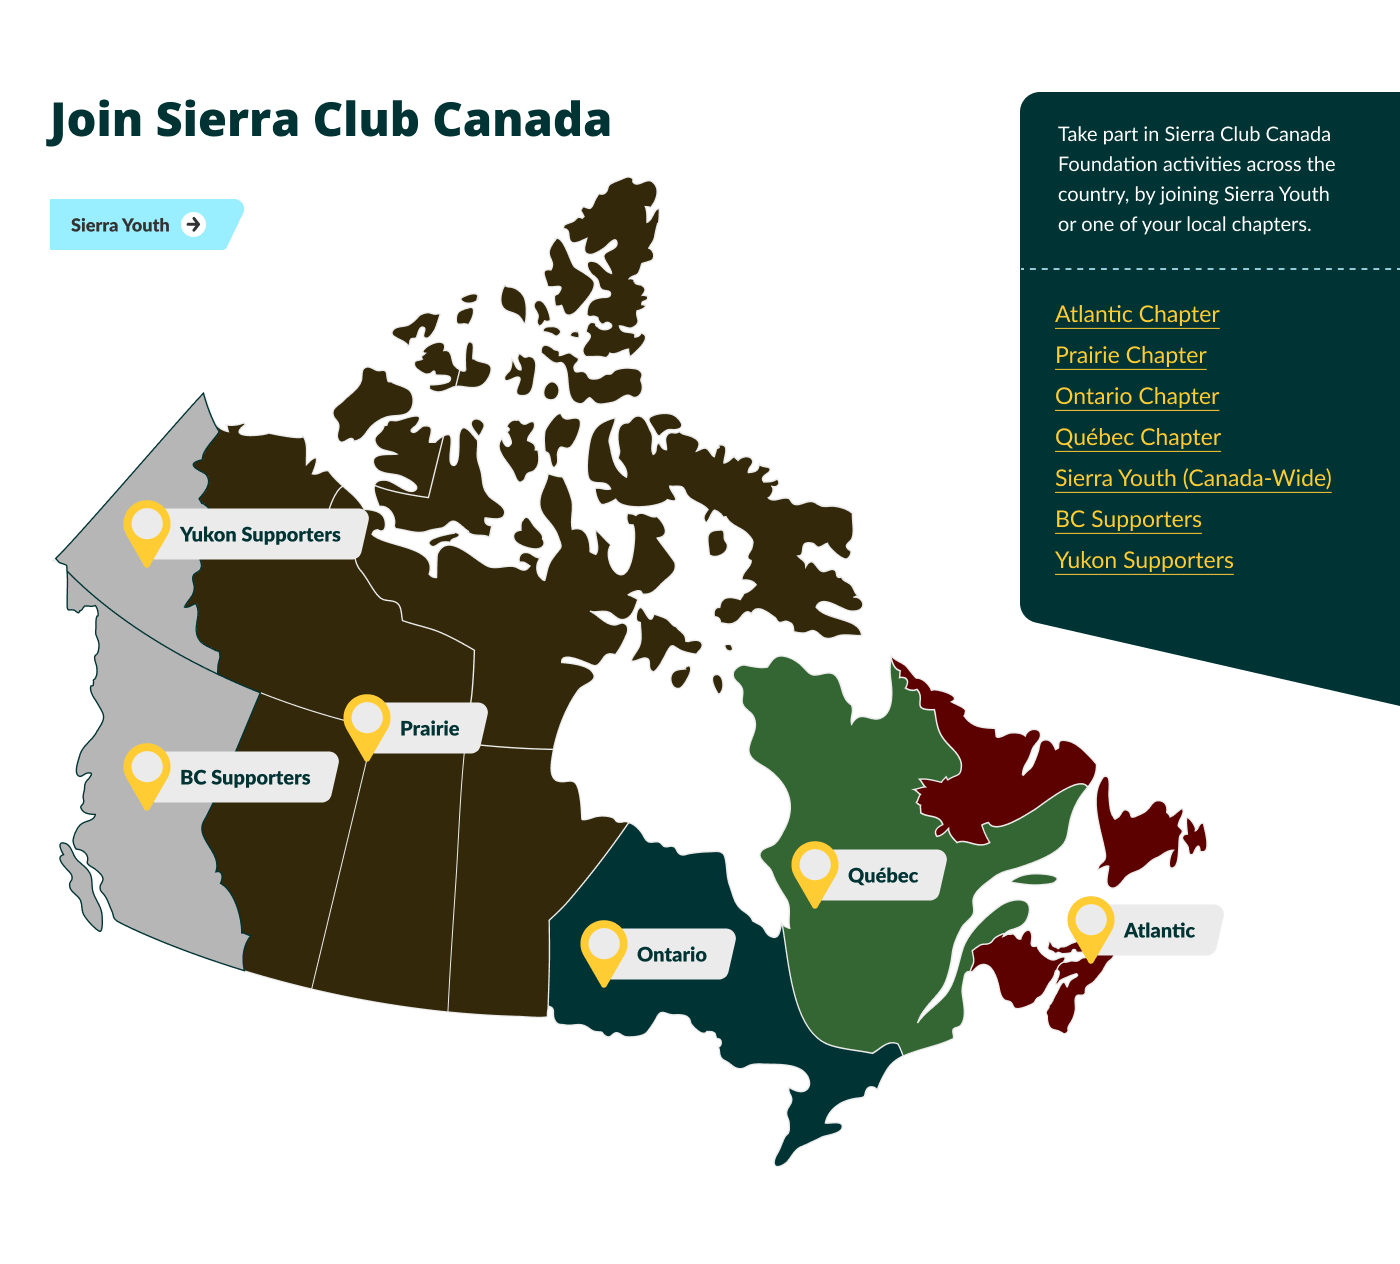 The Sierra Club Canada chapter map. The chapters are Atlantic Canada, the Praries, Ontario, Quebec, BC, and Yukon. There is also The Sierra Youth chapter which is Canada-wide.